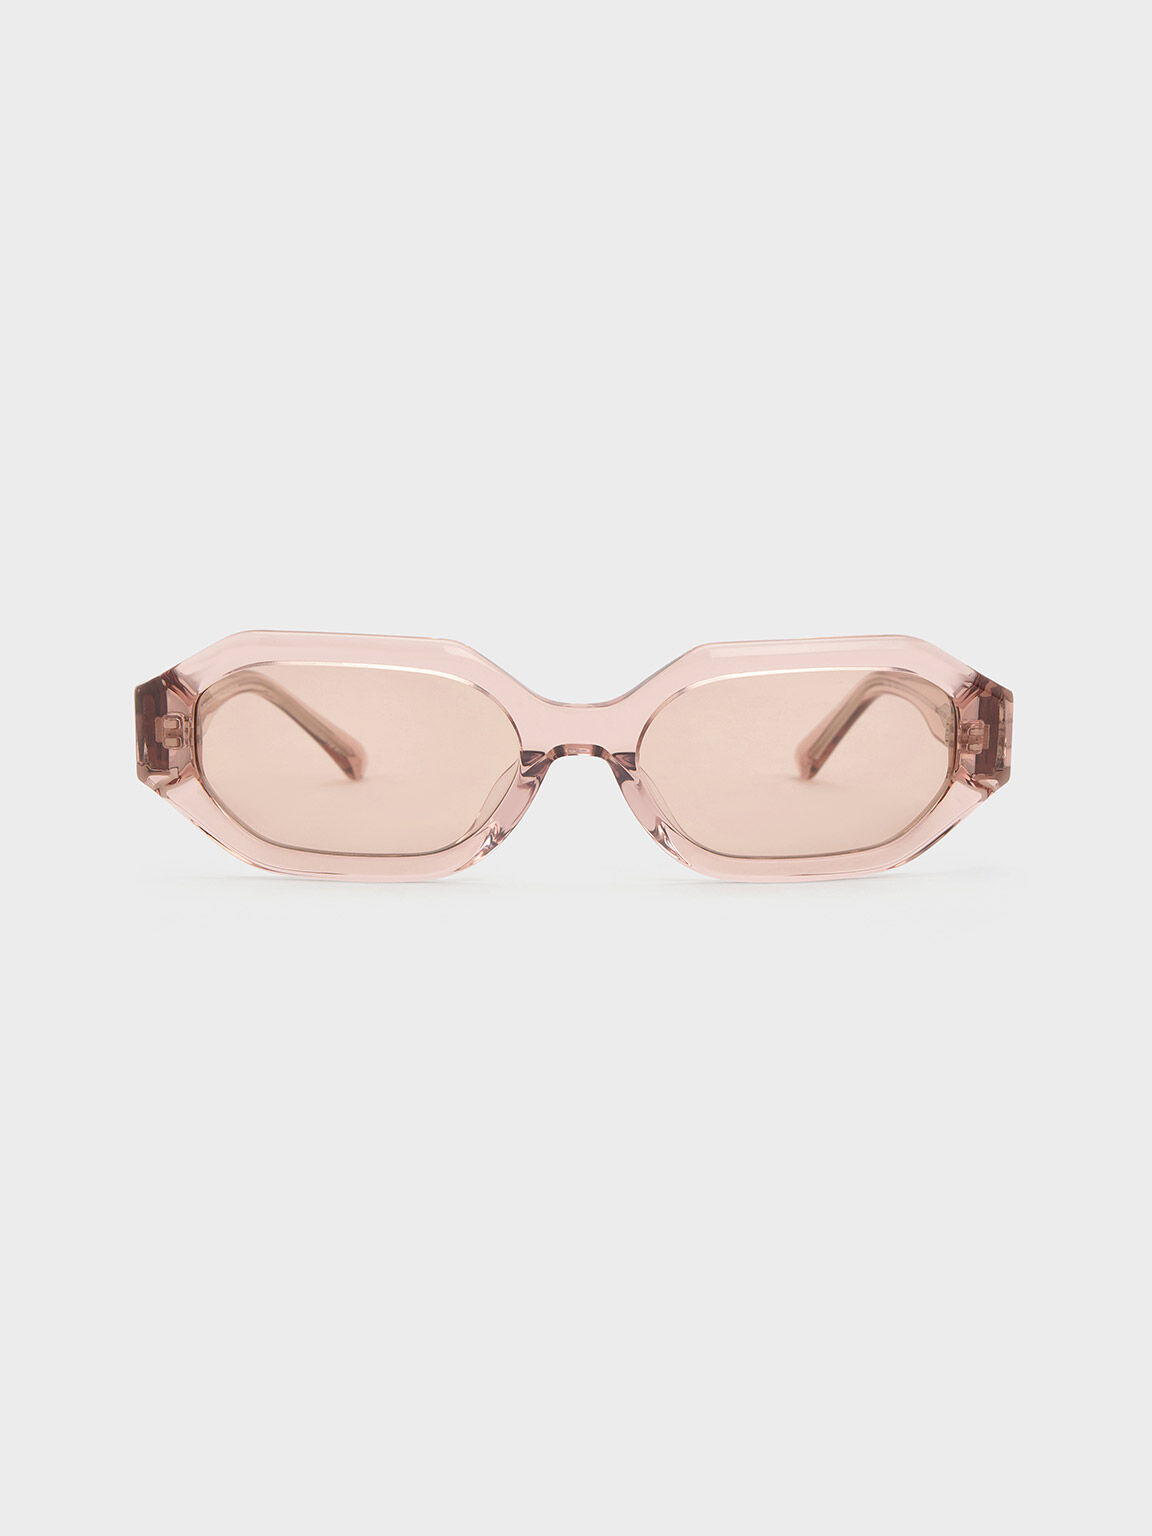 Gabine Recycled Acetate Oval Sunglasses, Pink, hi-res